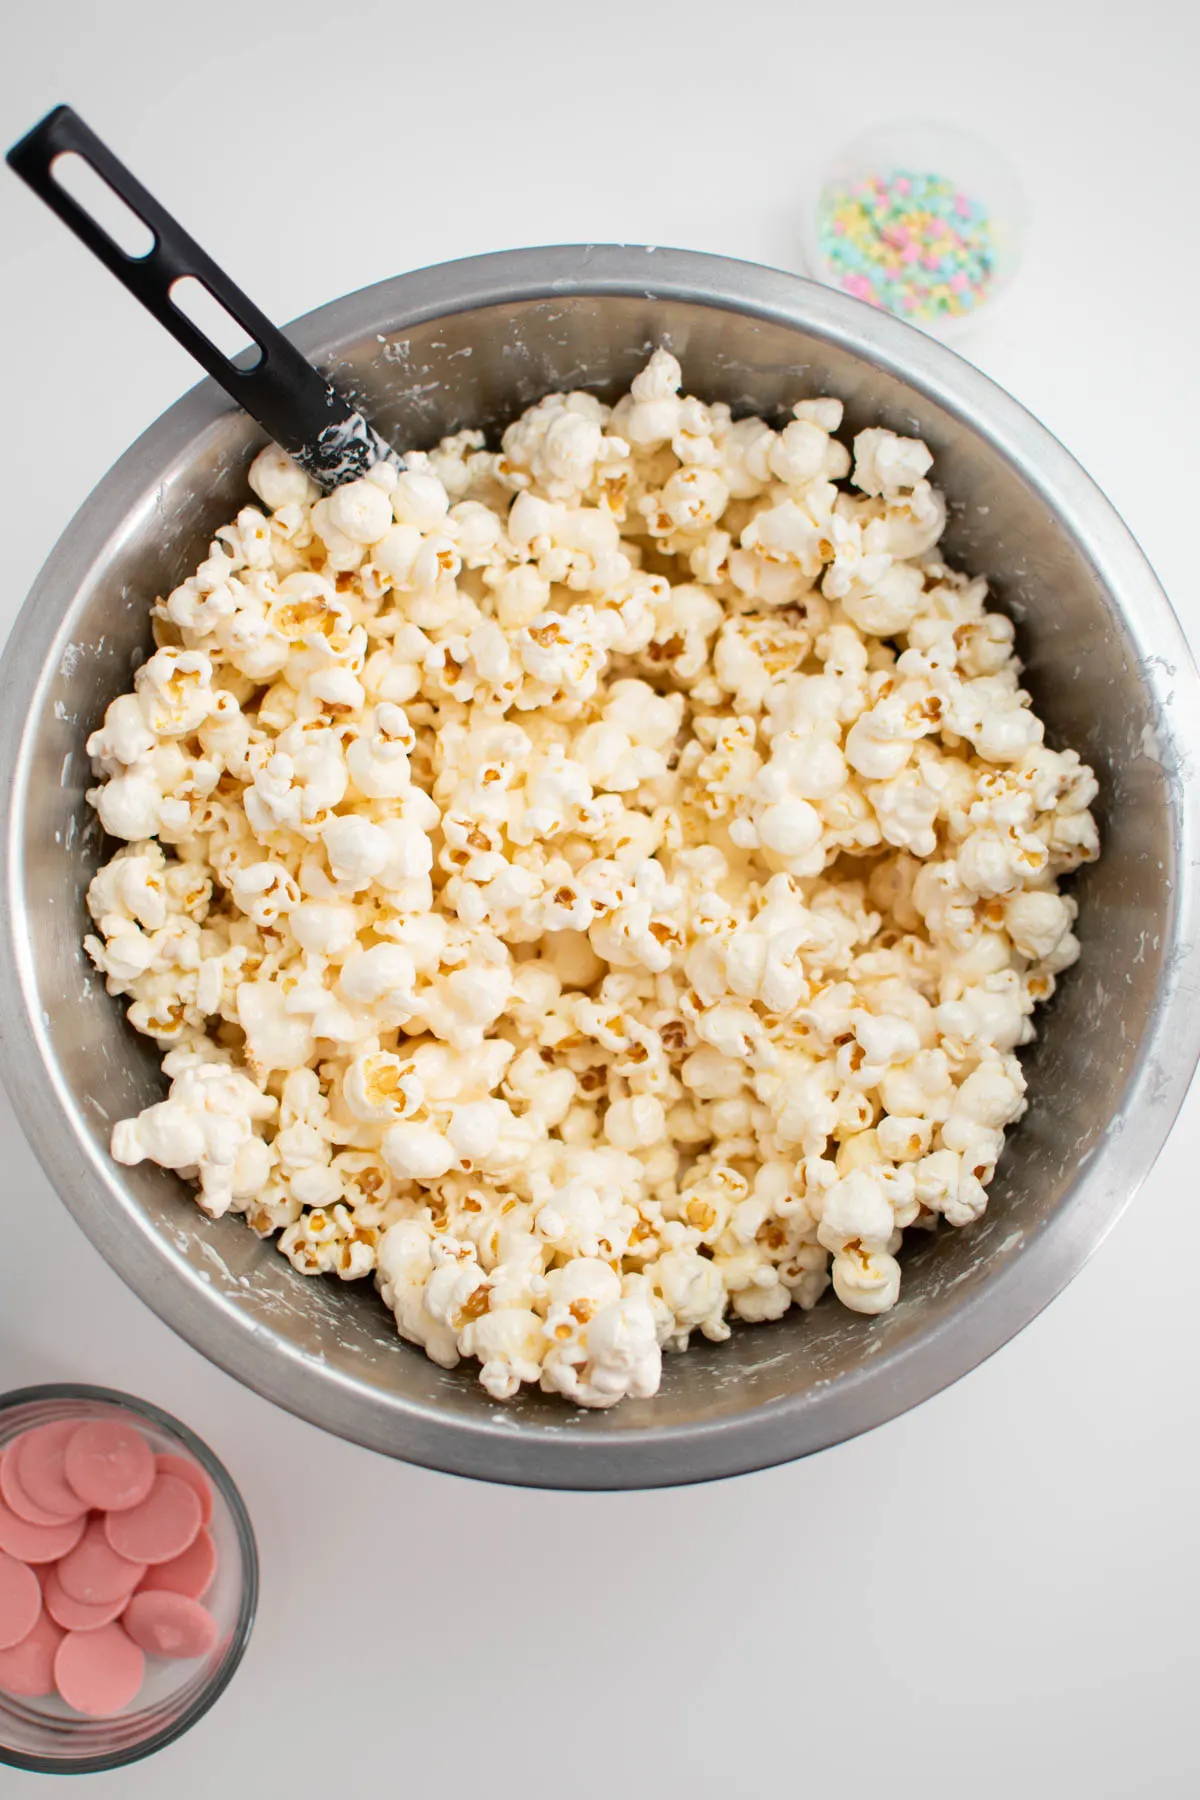 Marshmallow covered popcorn in large mixing bowl with other ingredients nearby.